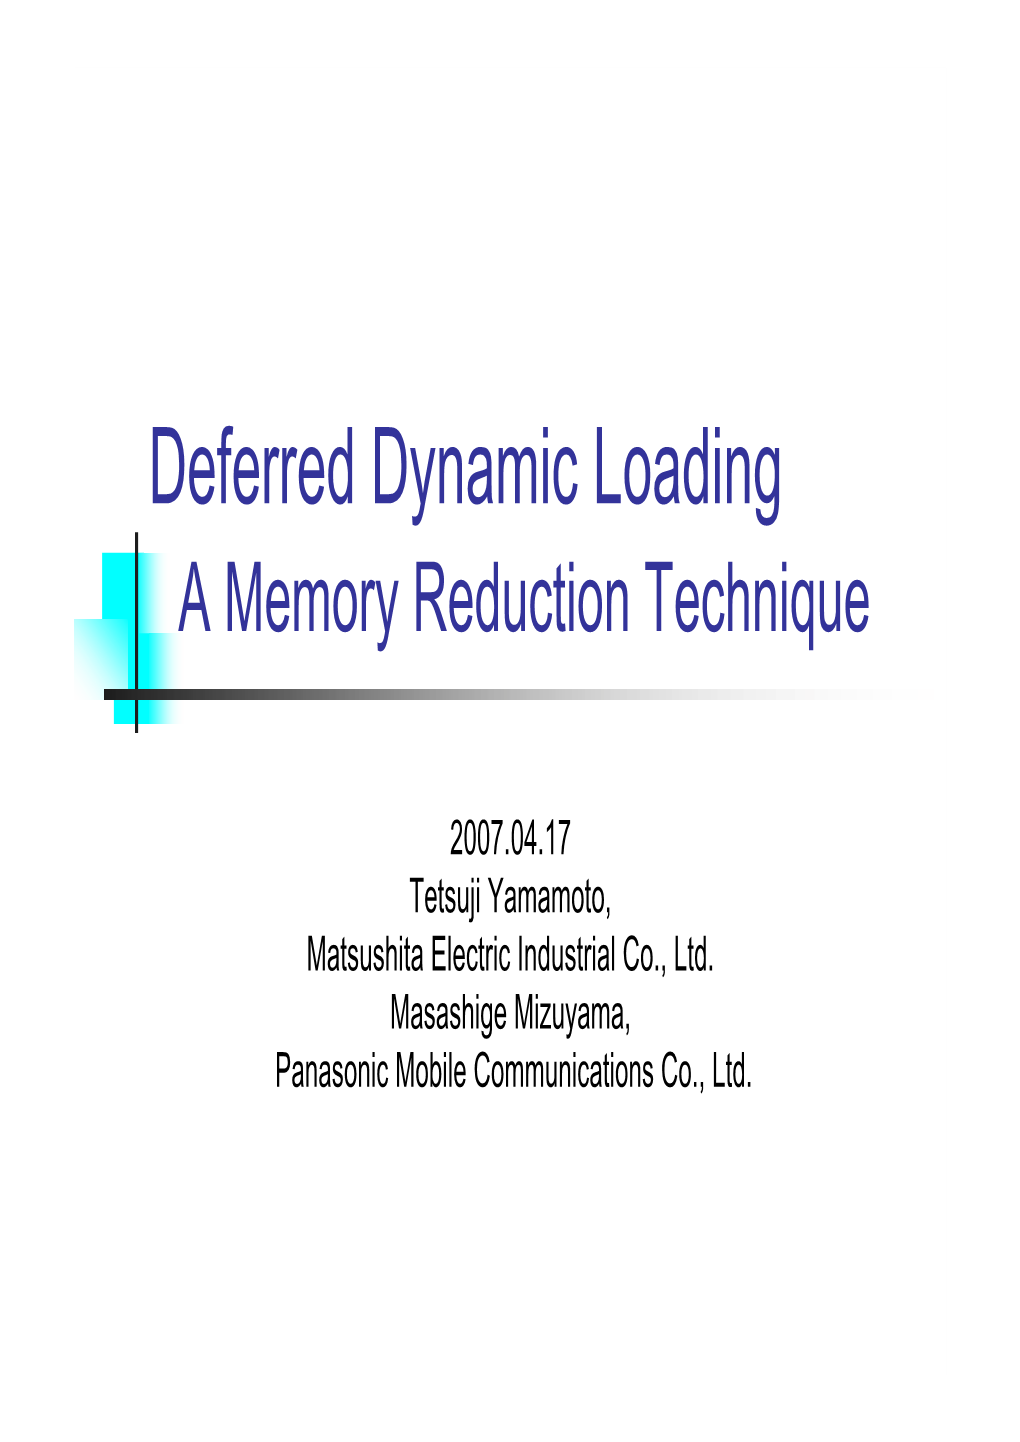 Deferred Dynamic Loading a Memory Reduction Technique